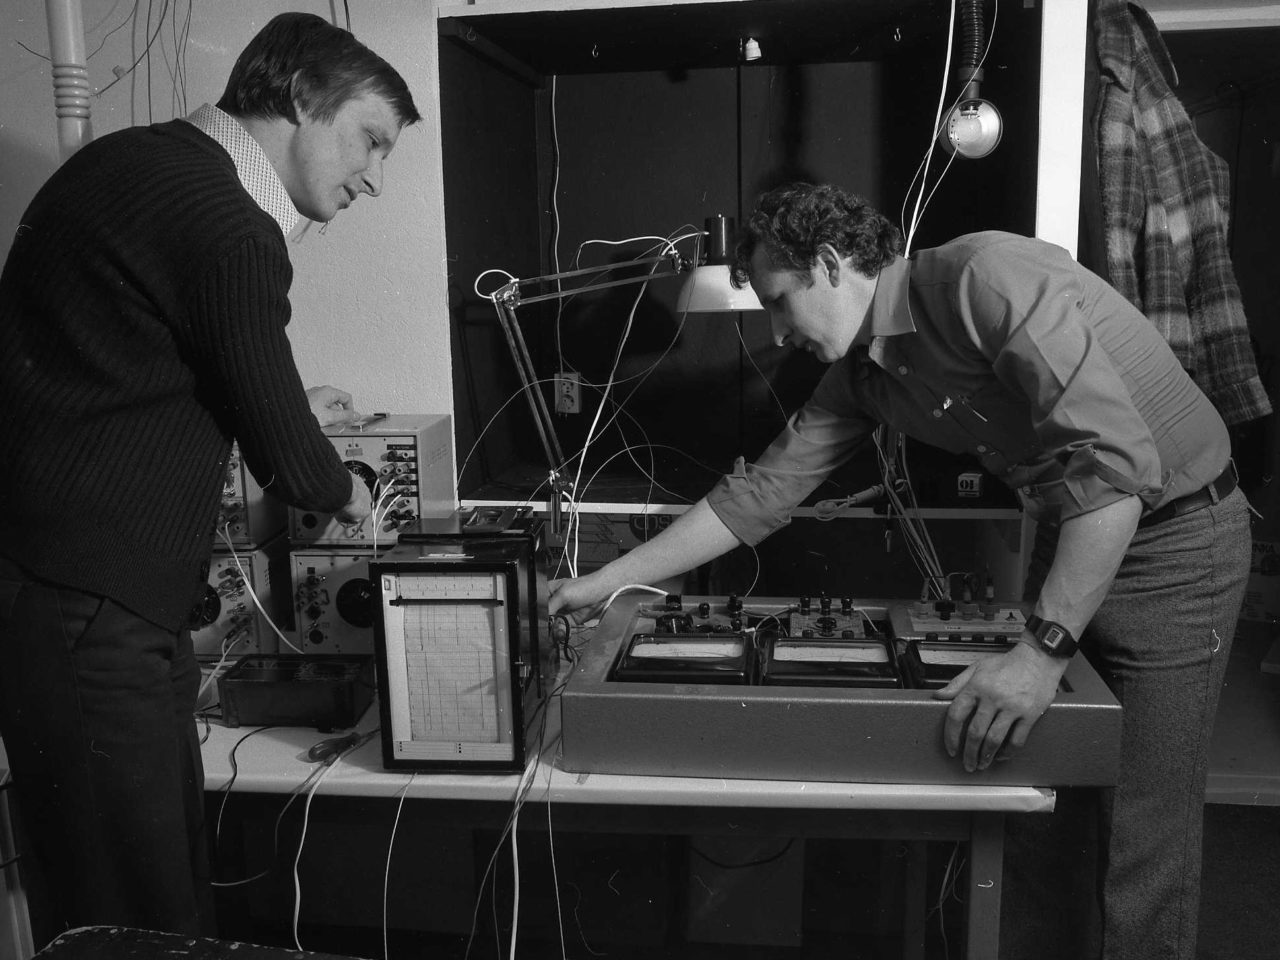 Two men dressed in 1970s style clothing check measuring instruments connected to a desk lamp.